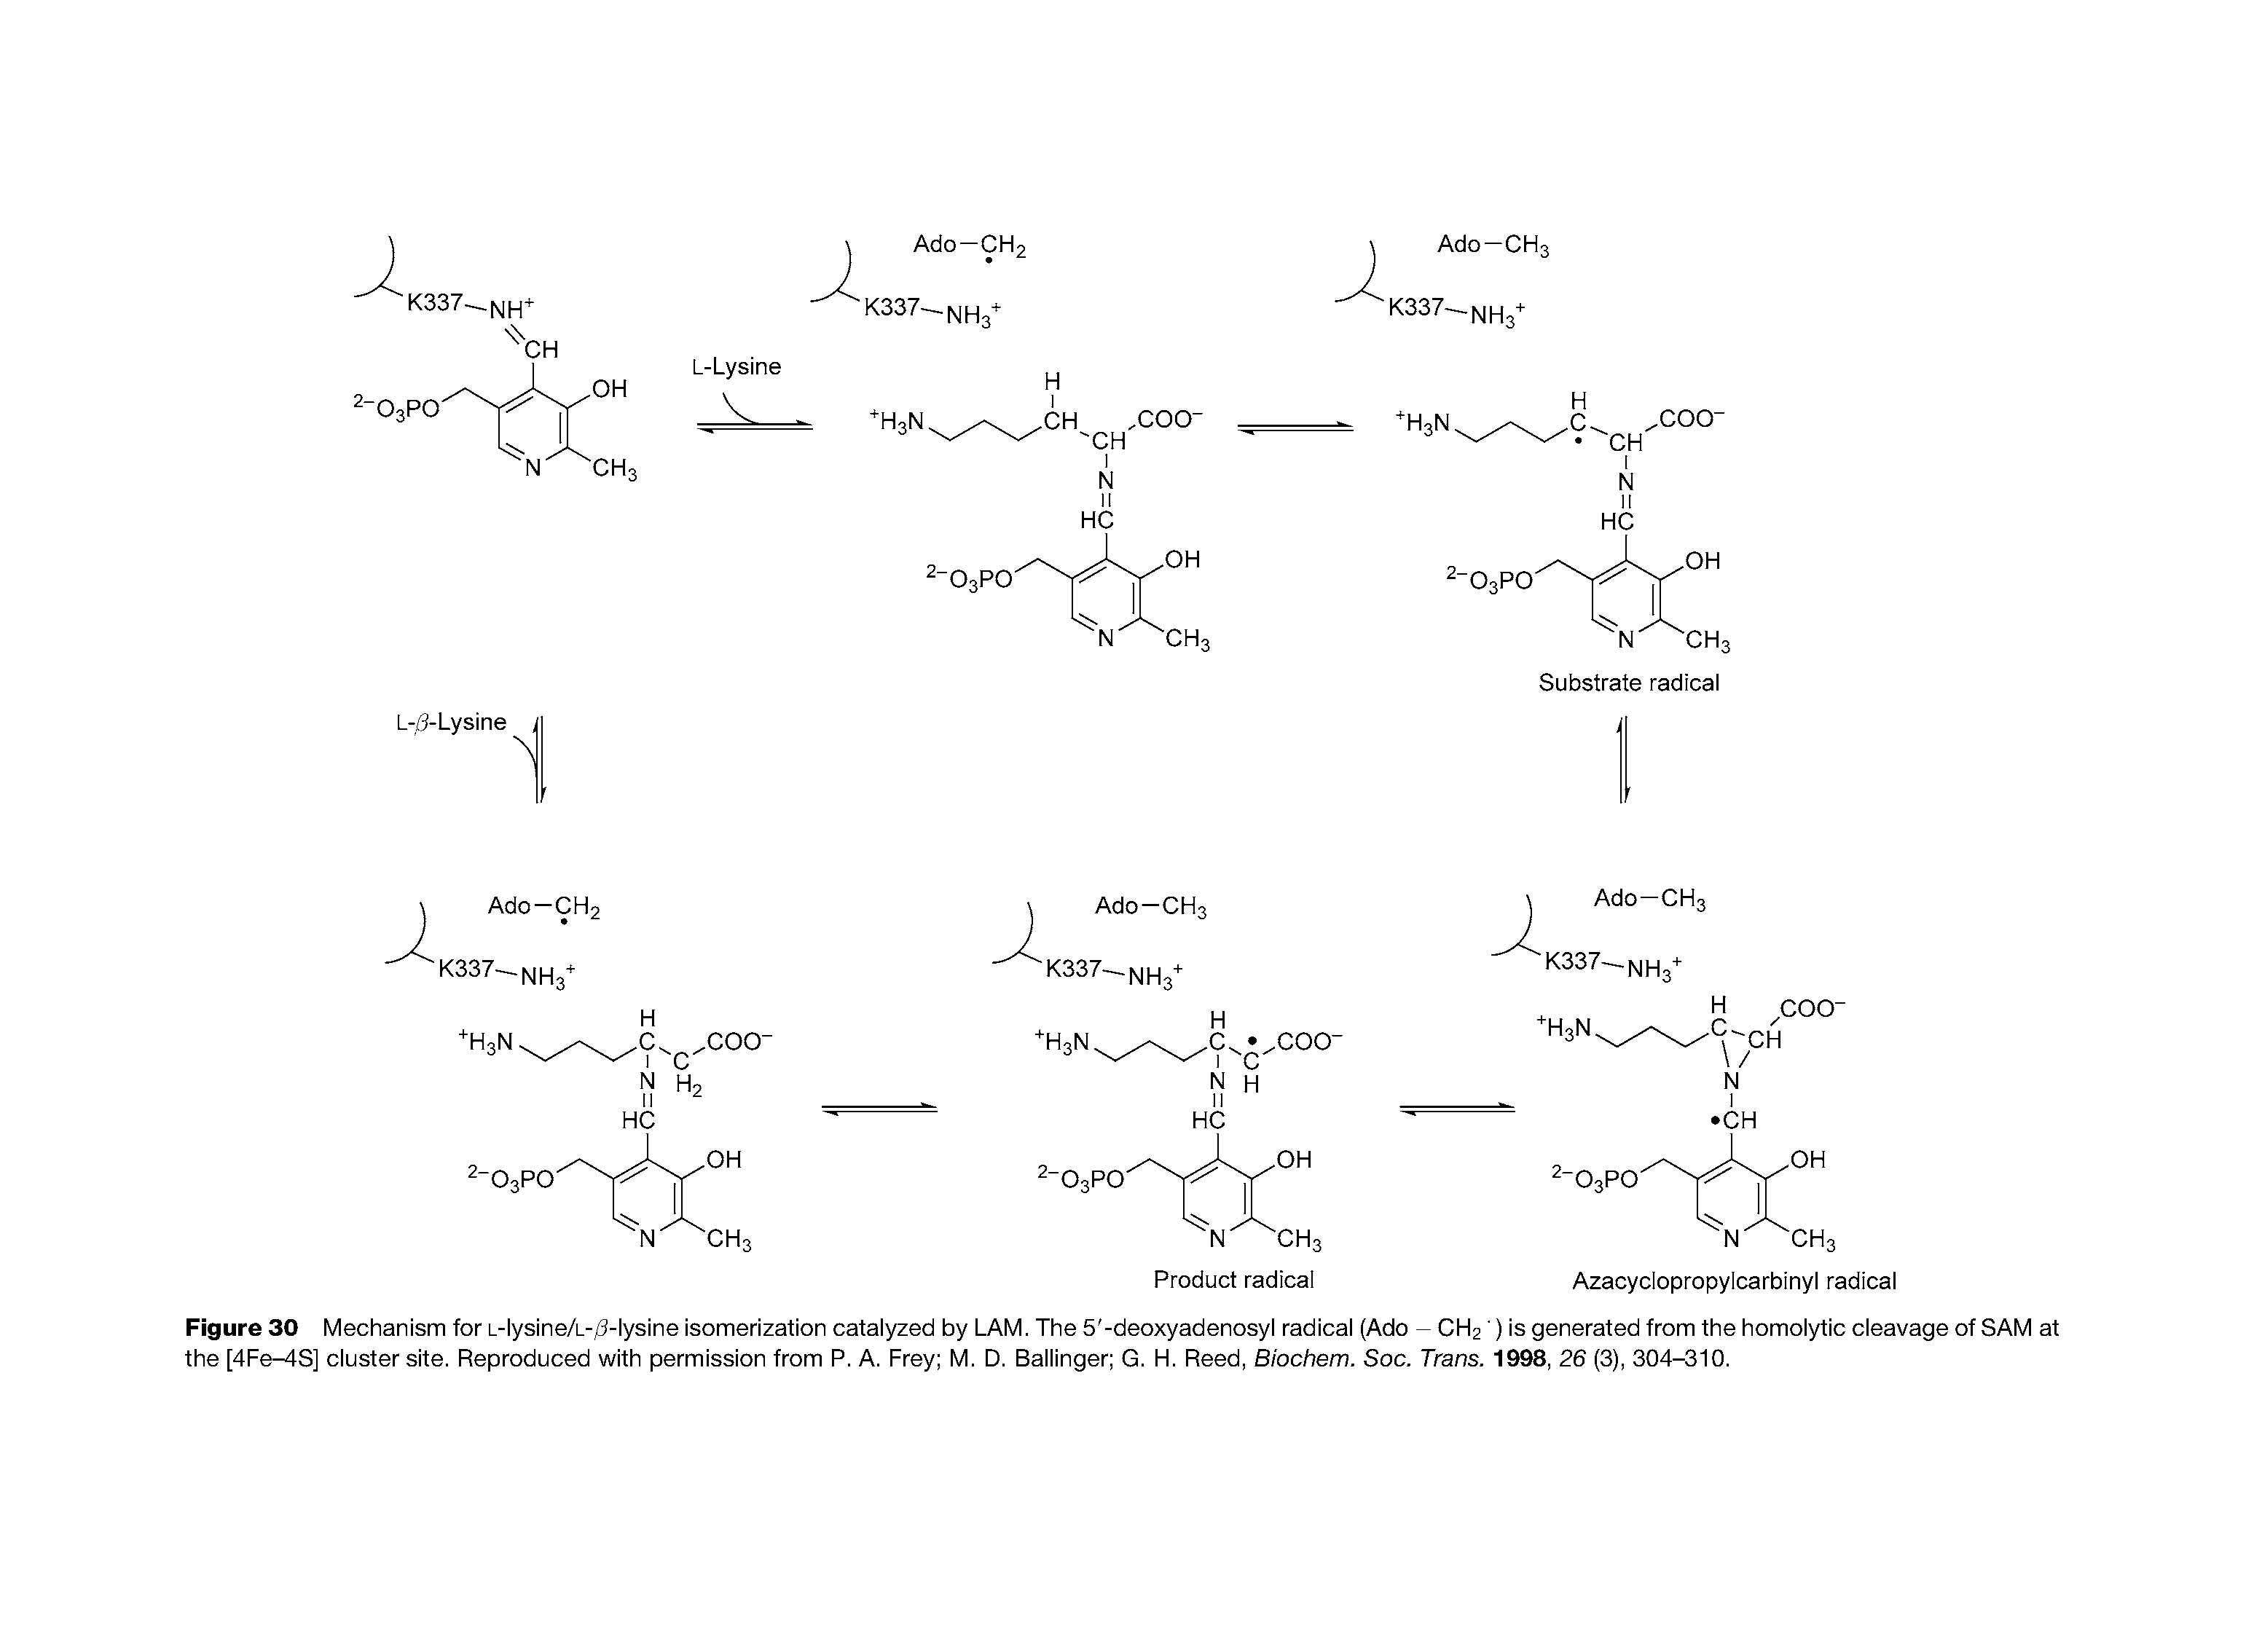 Figure 30 Mechanism for L-lyslne/L-/3-lyslne Isomerization catalyzed by LAM. The 5 -deoxyadenosyl radical (Ado - CH2 ) Is generated from the homolytic cleavage of SAM at the [4Fe S] cluster site. Reproduced with permission from P. A. Frey M. D. Ballinger G. H. Reed, Biochem. Soc. Trans. 1998, 26 (3), 304-310.